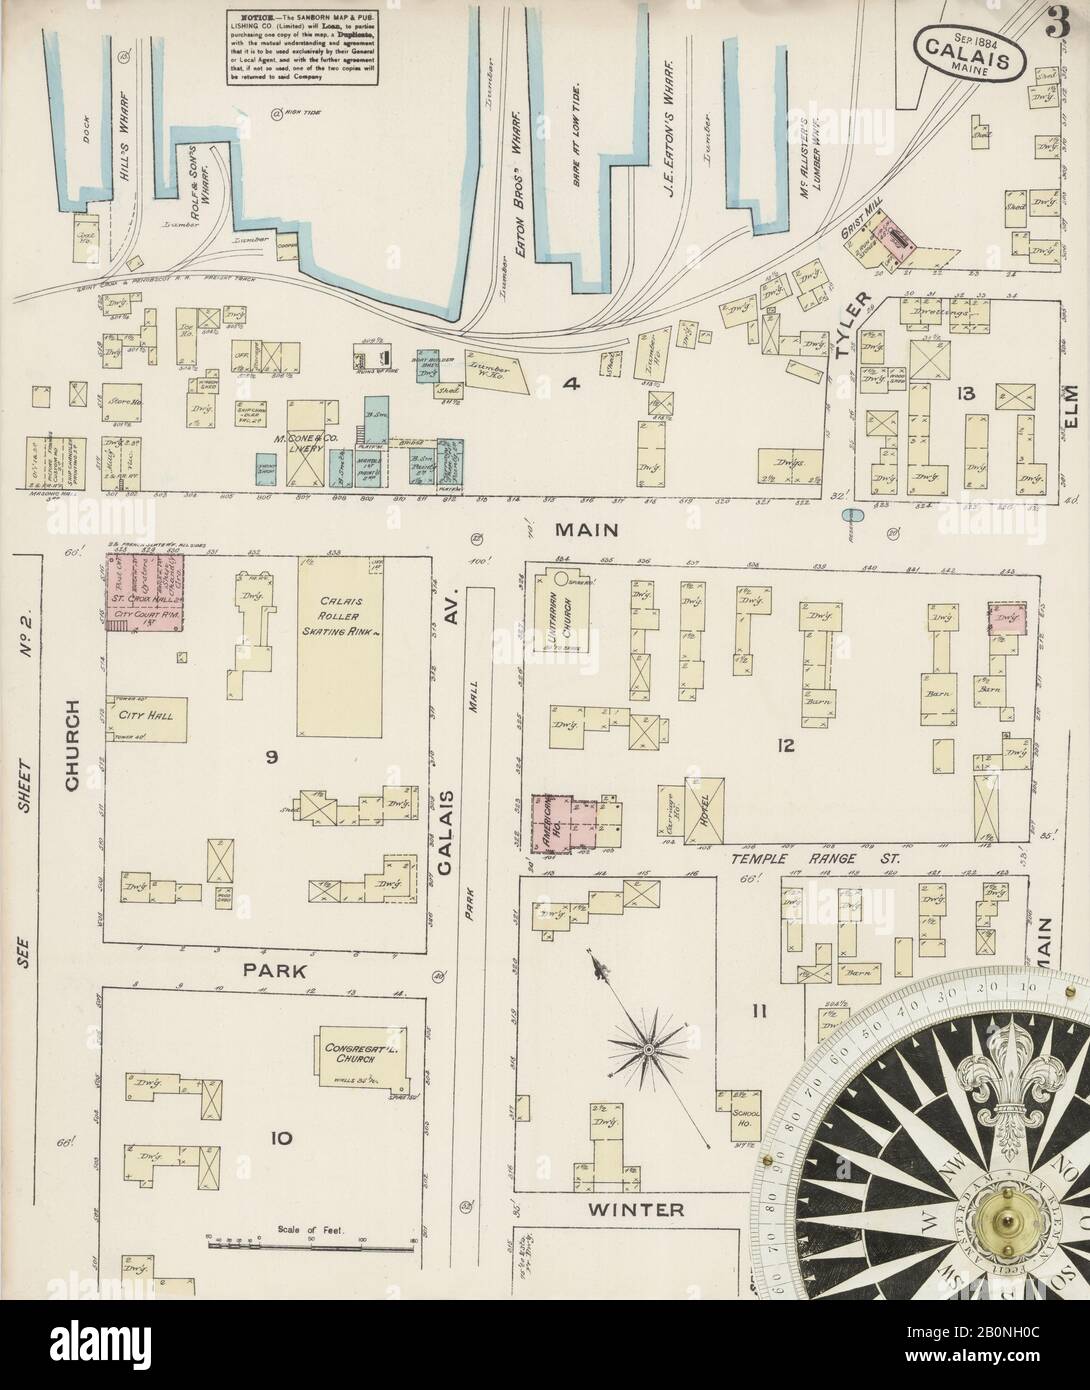 Image 3 of Sanborn Fire Insurance Map from Calais, Washington County, Maine. Sep 1884. 5 Sheet(s), America, street map with a Nineteenth Century compass Stock Photo